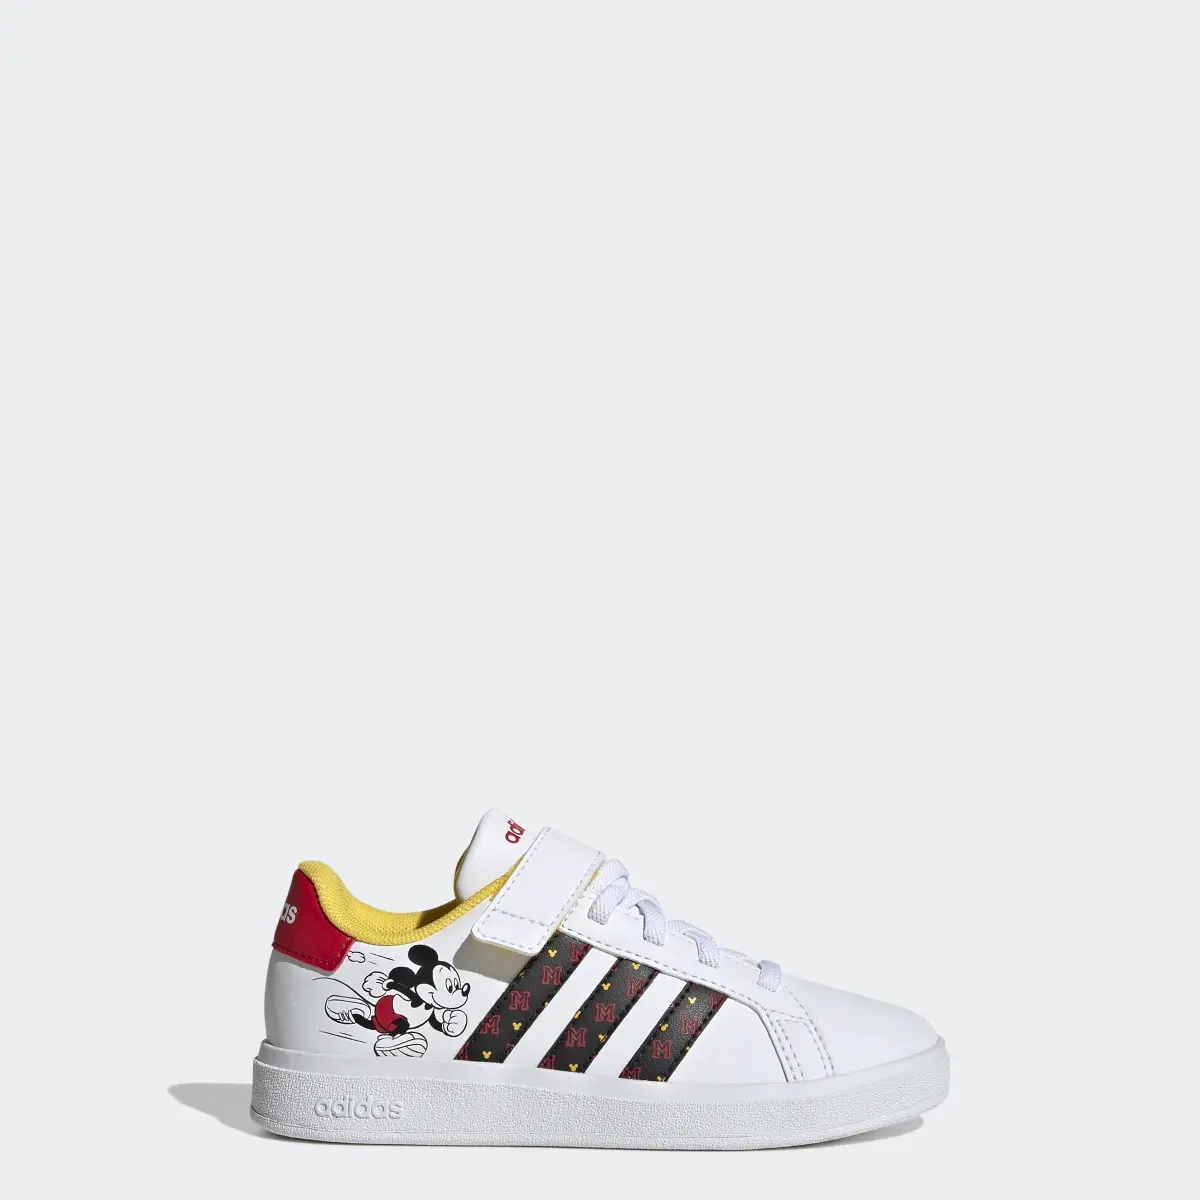 Adidas x Disney Grand Court Micky Hook-and-Loop Schuh. 1